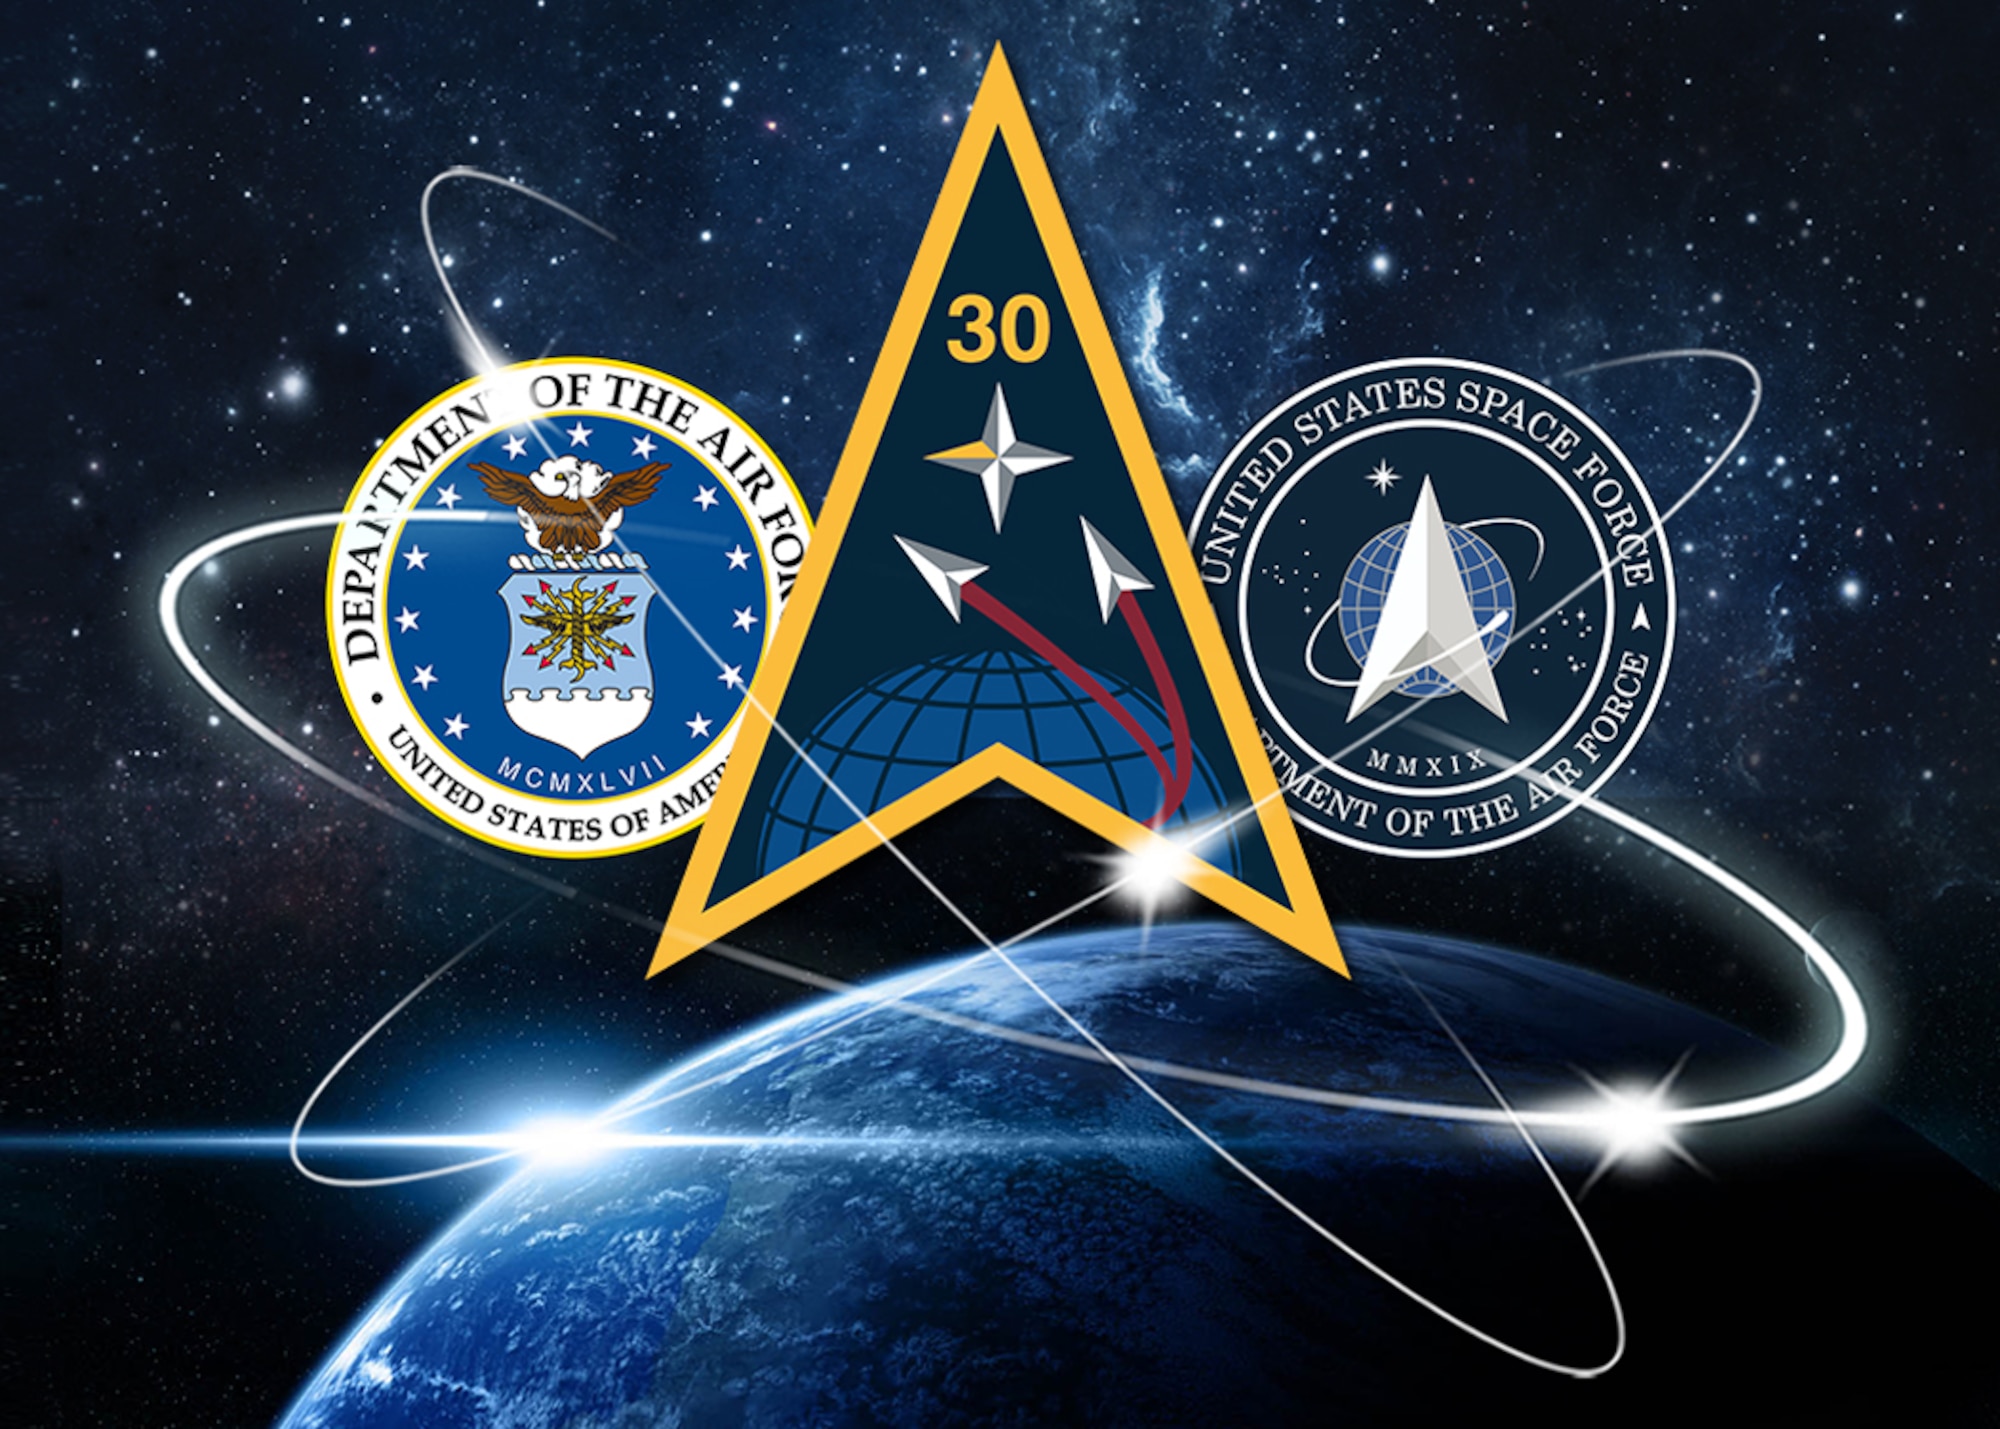 A logo of Space Launch Delta 30, the U.S. Air Force, and the U.S. Space Force